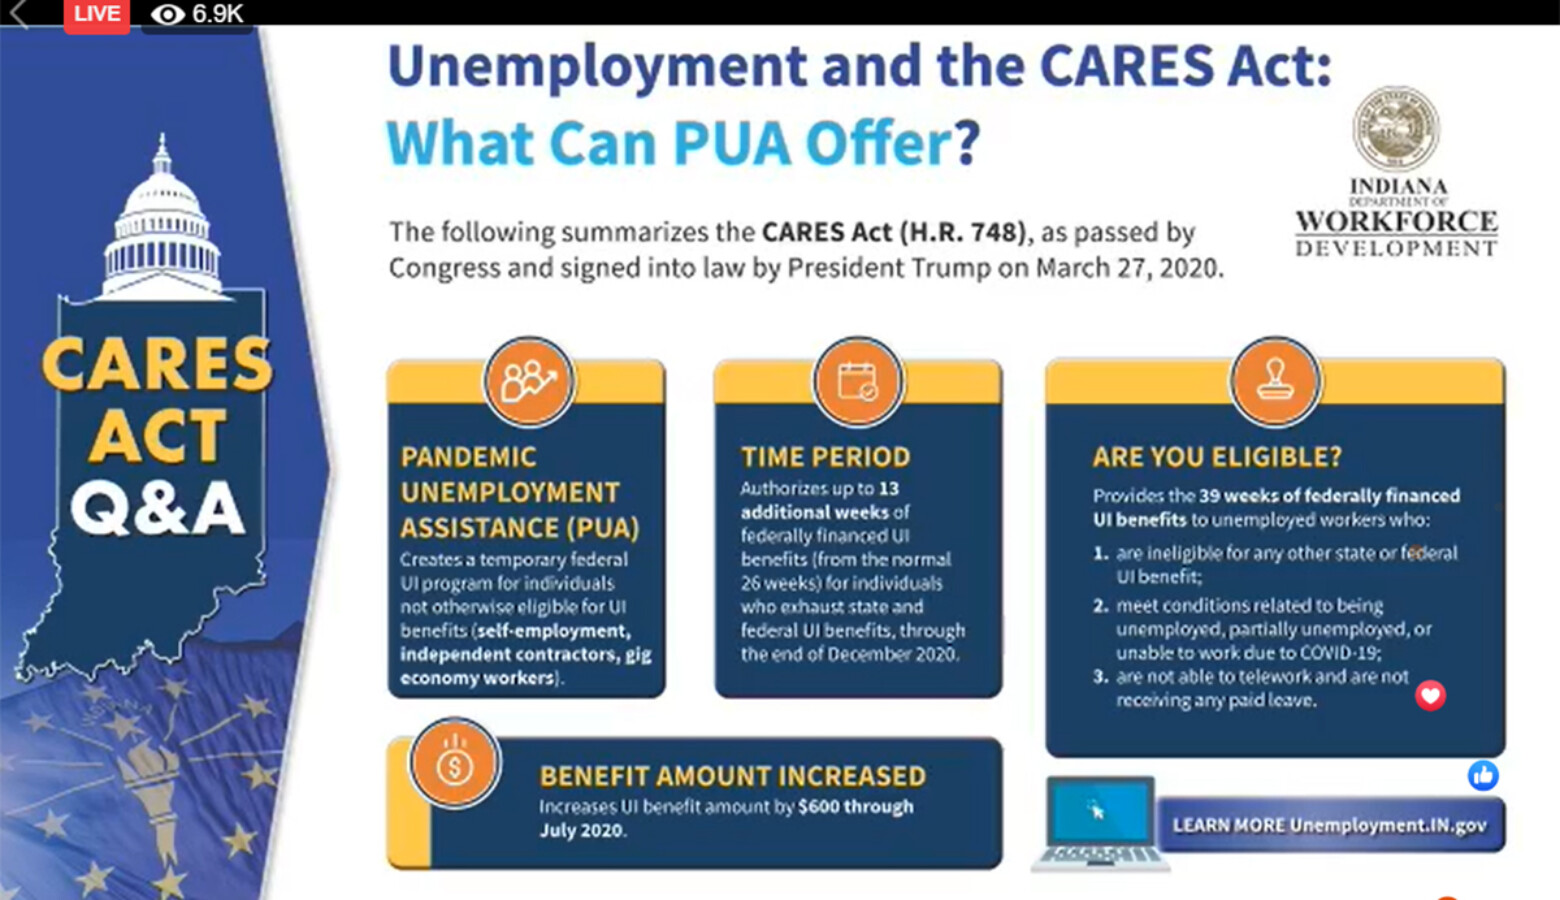 The Indiana Department of Workforce Development provided updates Wednesday about how the federal CARES Act has changed unemployment insurance benefits. (IndianaDWD/Facebook)